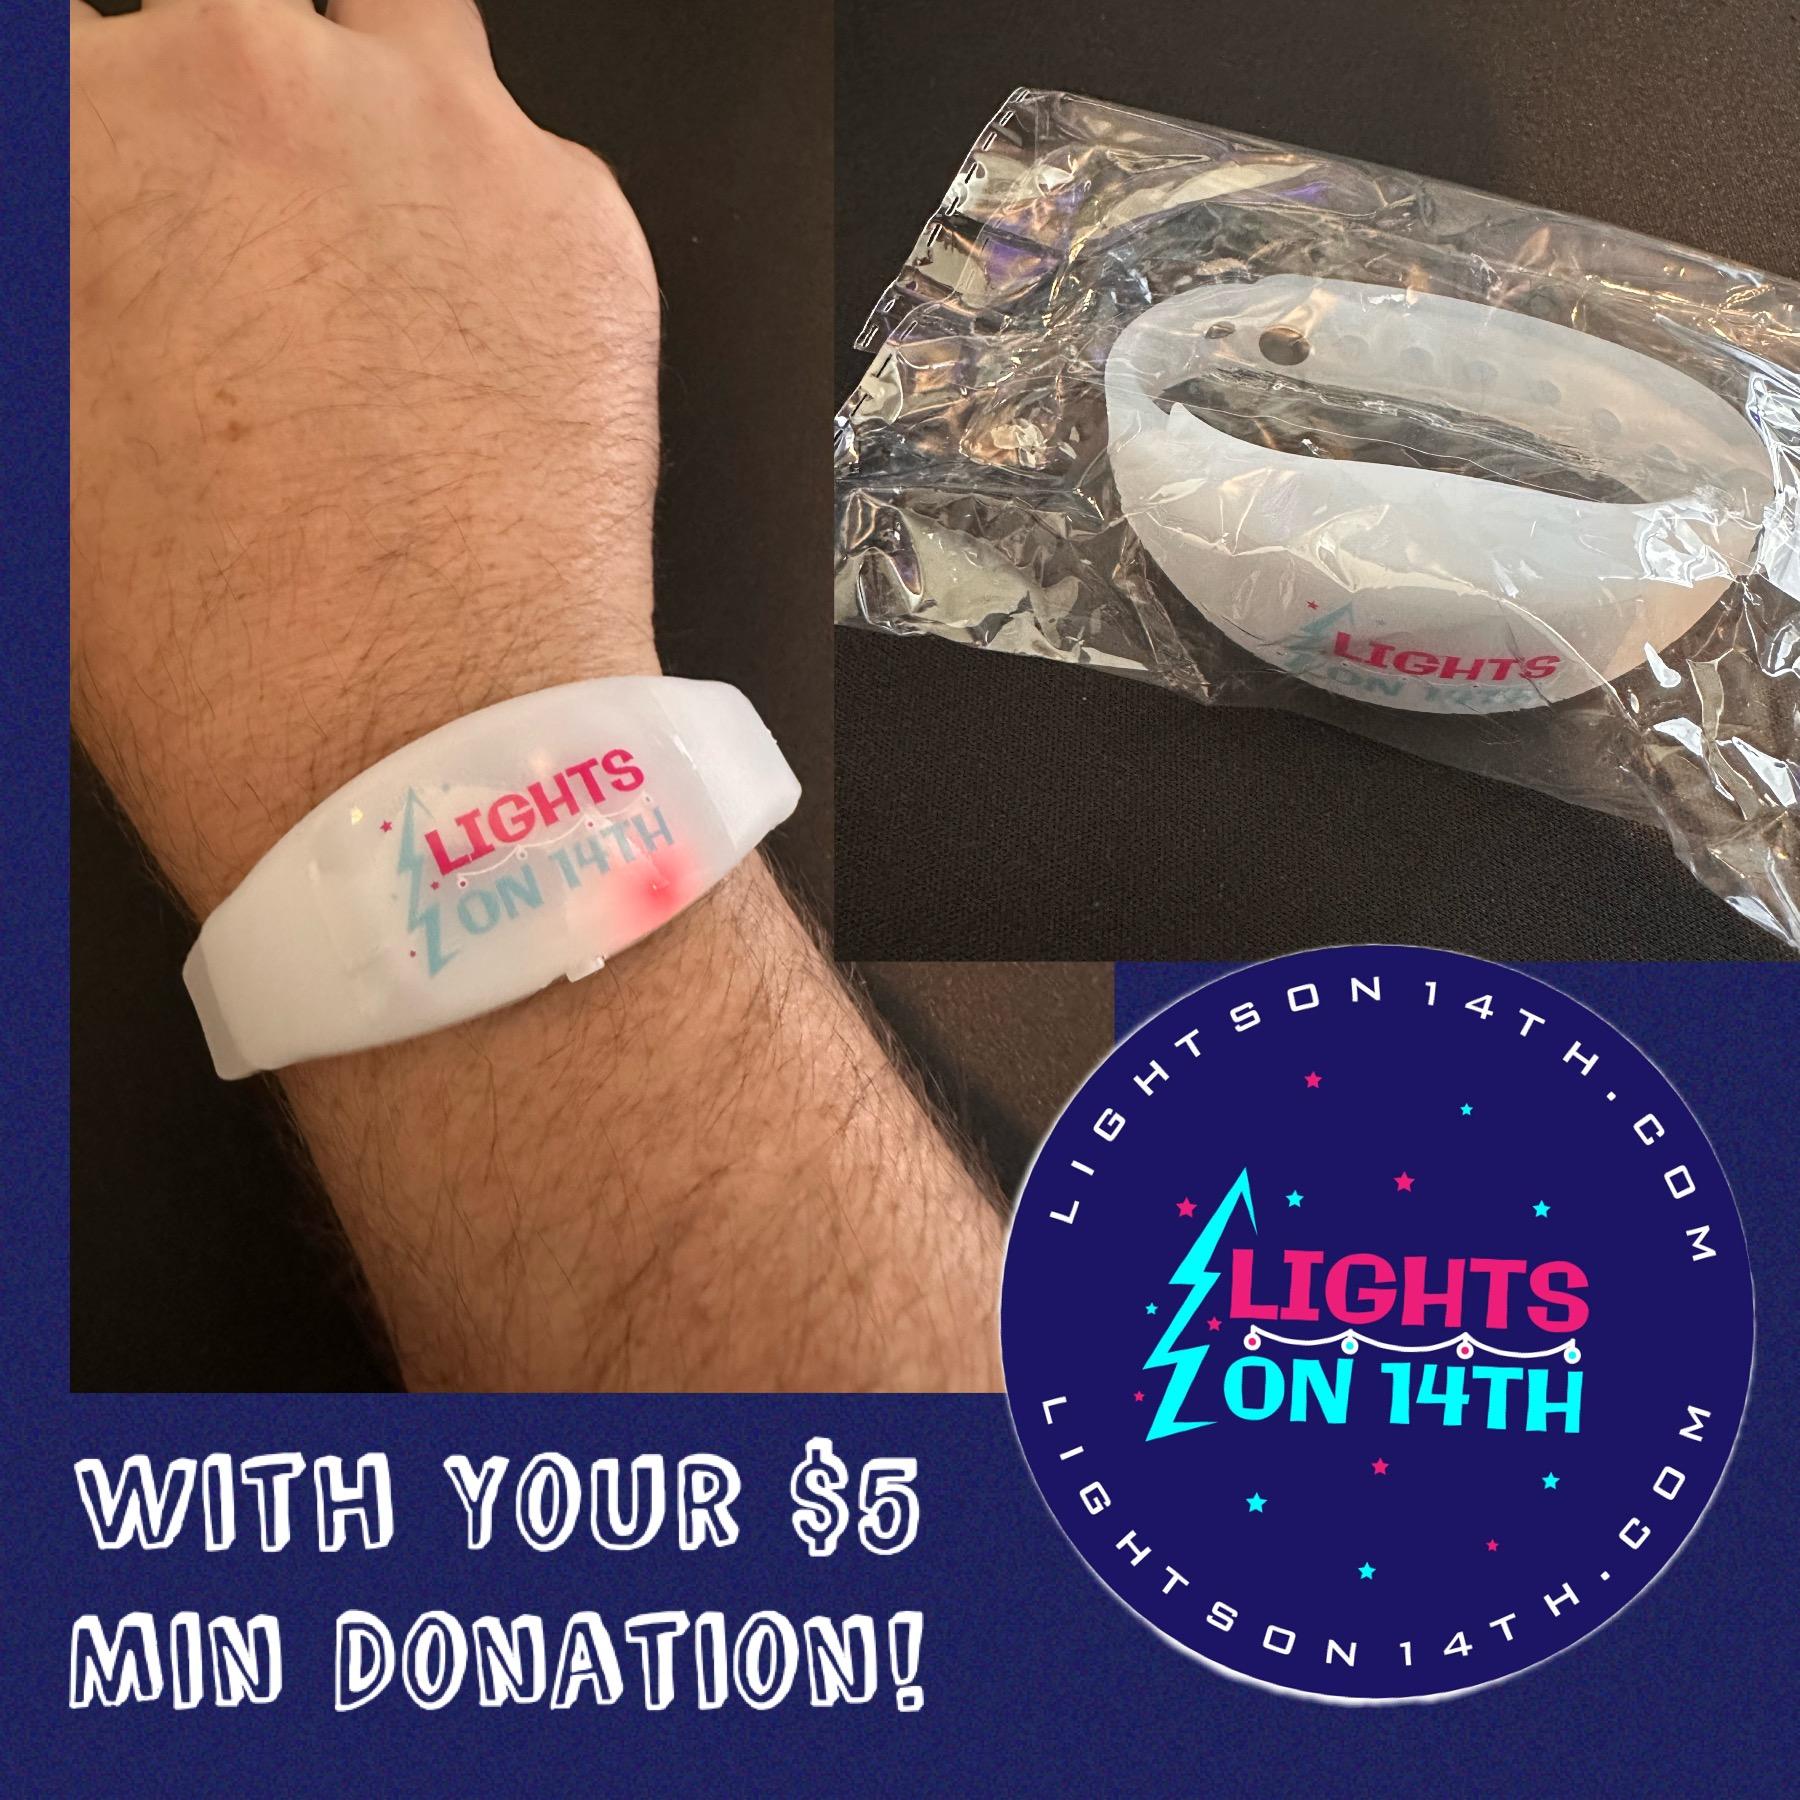 LED bracelets displayed are available with a $5 minimum donation